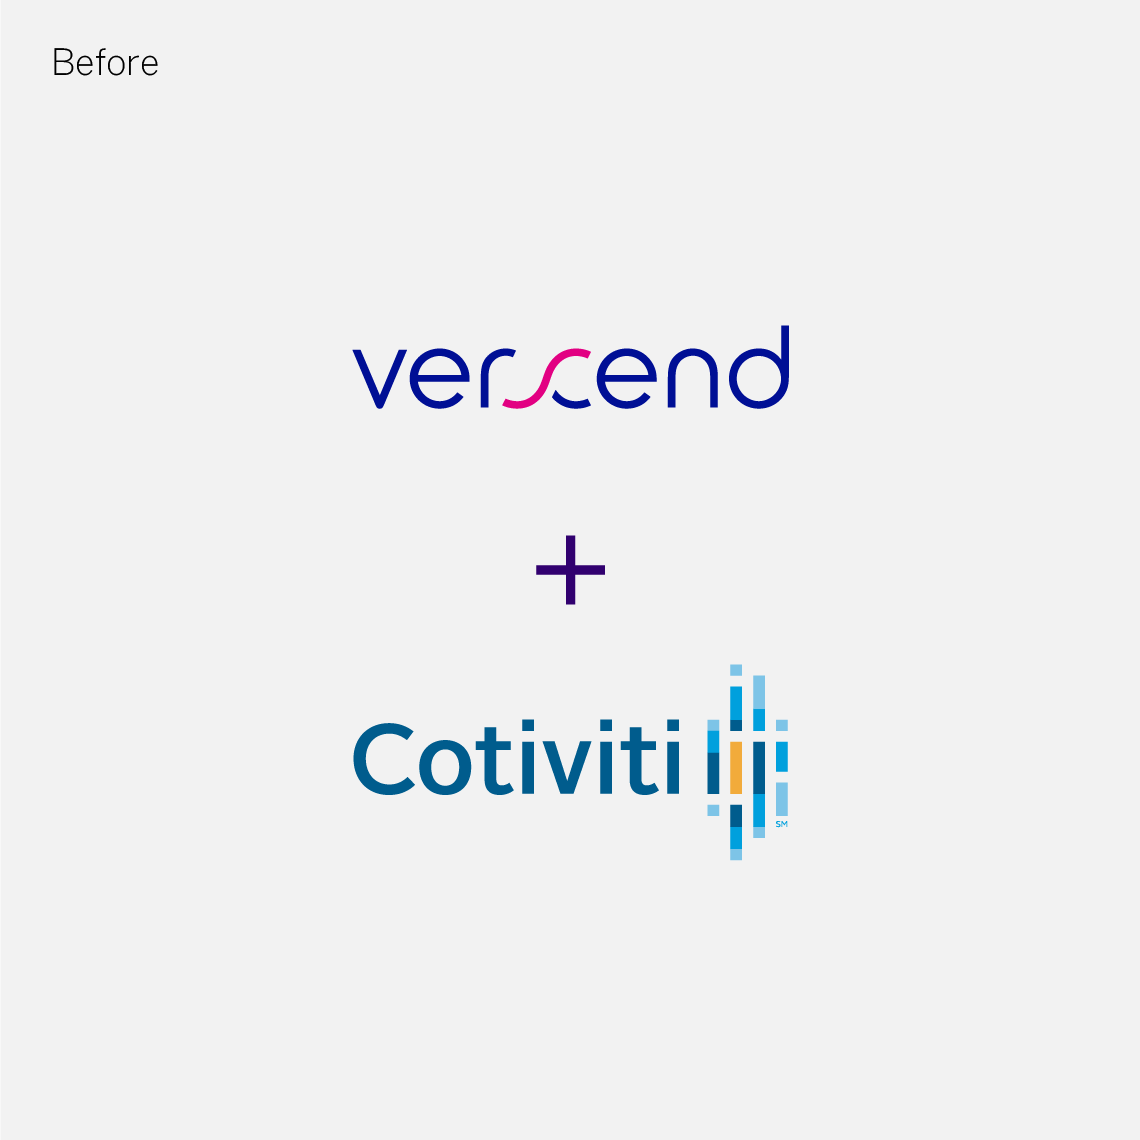 Older versions of the logos of Verscend and Cotiviti over a white background